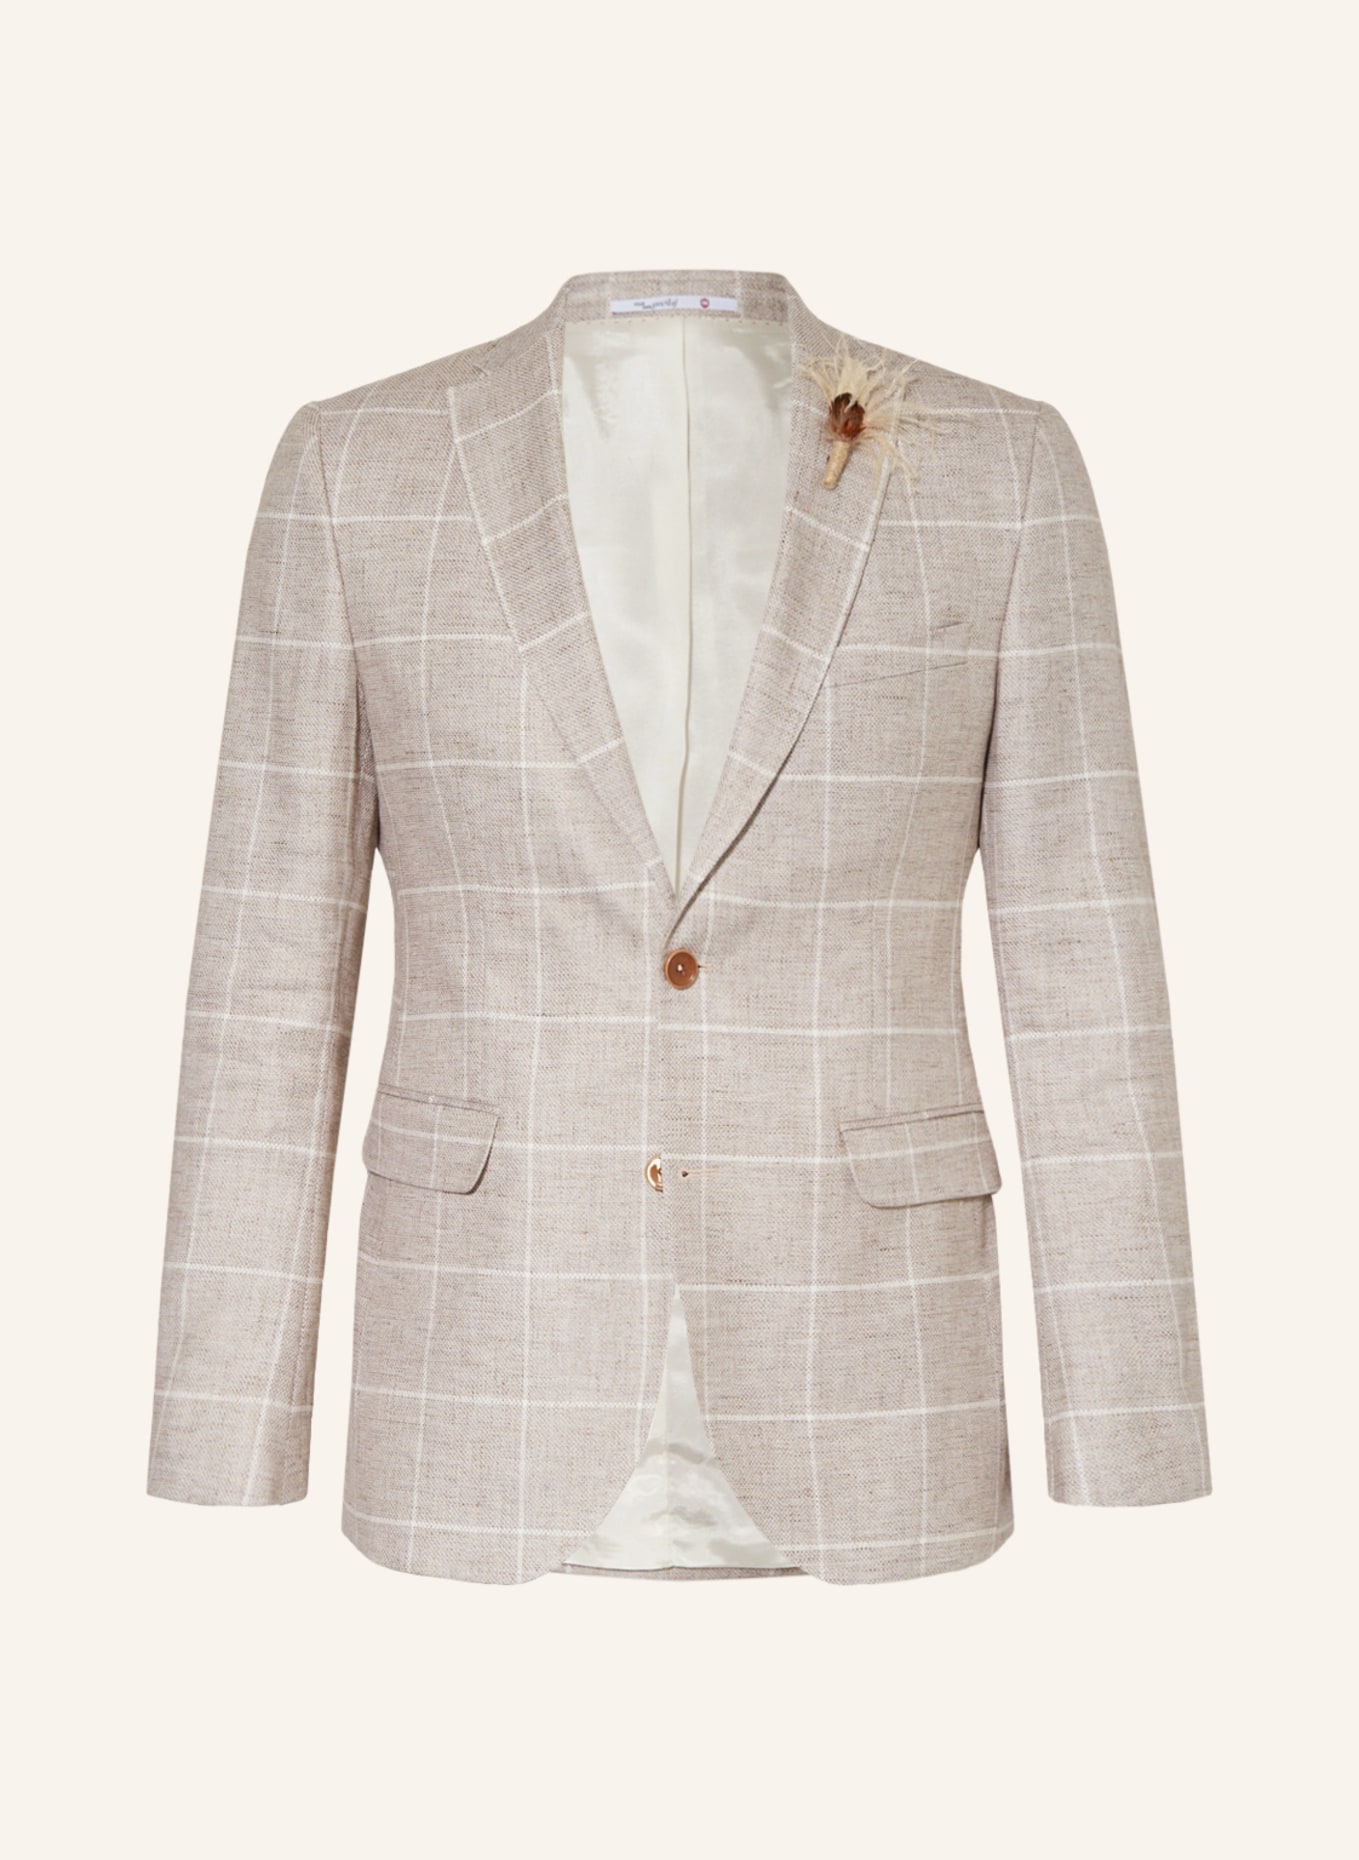 CG - CLUB of GENTS Suit jacket CG PAUL slim fit with linen, Color: 21 beige hell (Image 1)